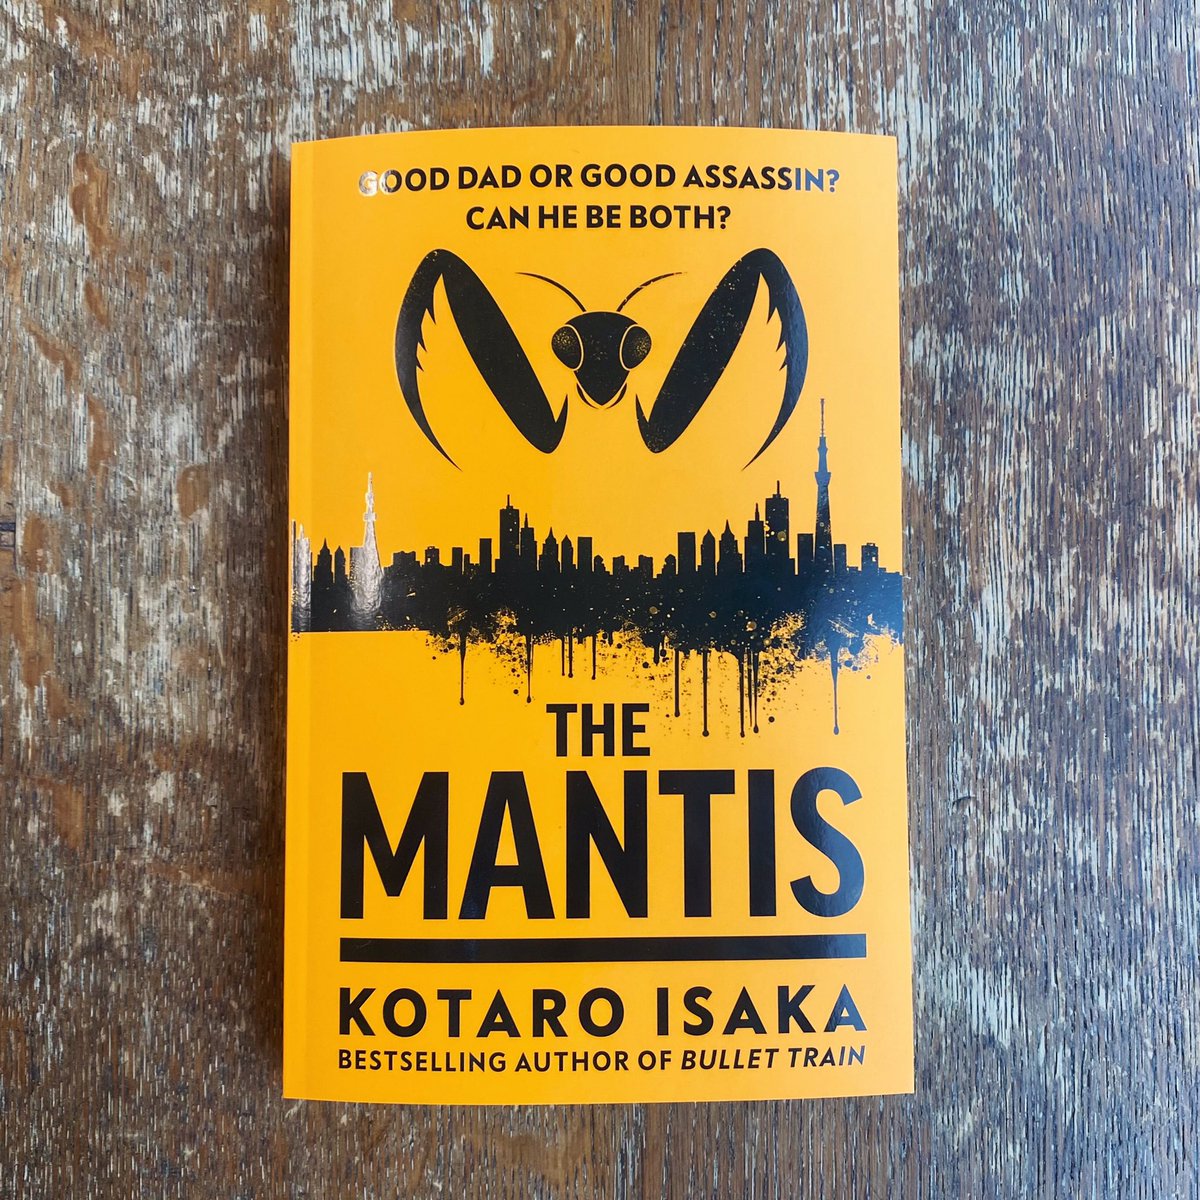 THE MANTIS is out today in paperback! From Kotaro Isaka, the author of Bullet Train, comes a thrilling & funny crime novel, as an assassin tries to have it all — being a good dad and killing it at work (literally). Find out more here: penguin.co.uk/books/453632/t…